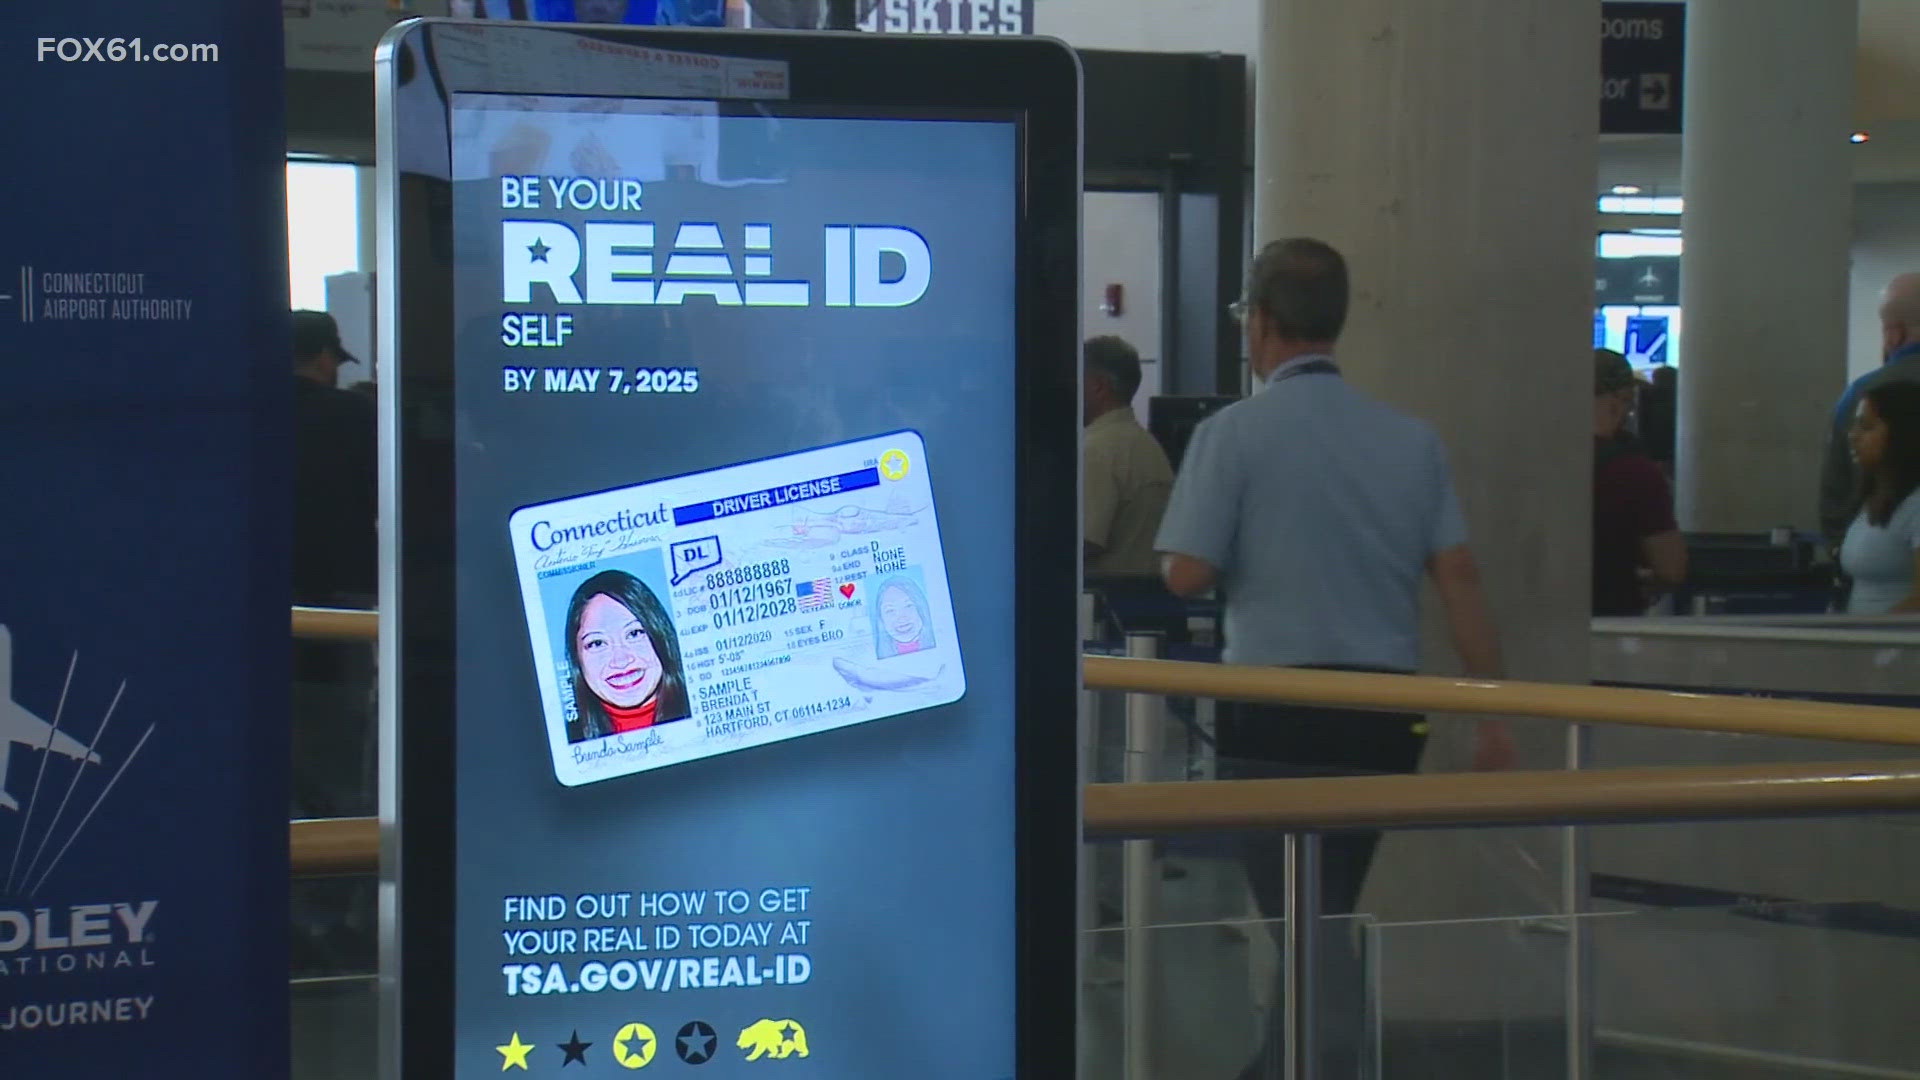 People who do not switch to REAL ID-approved licenses, which goes into effect on May 7, 2025, will not be allowed on domestic flights.